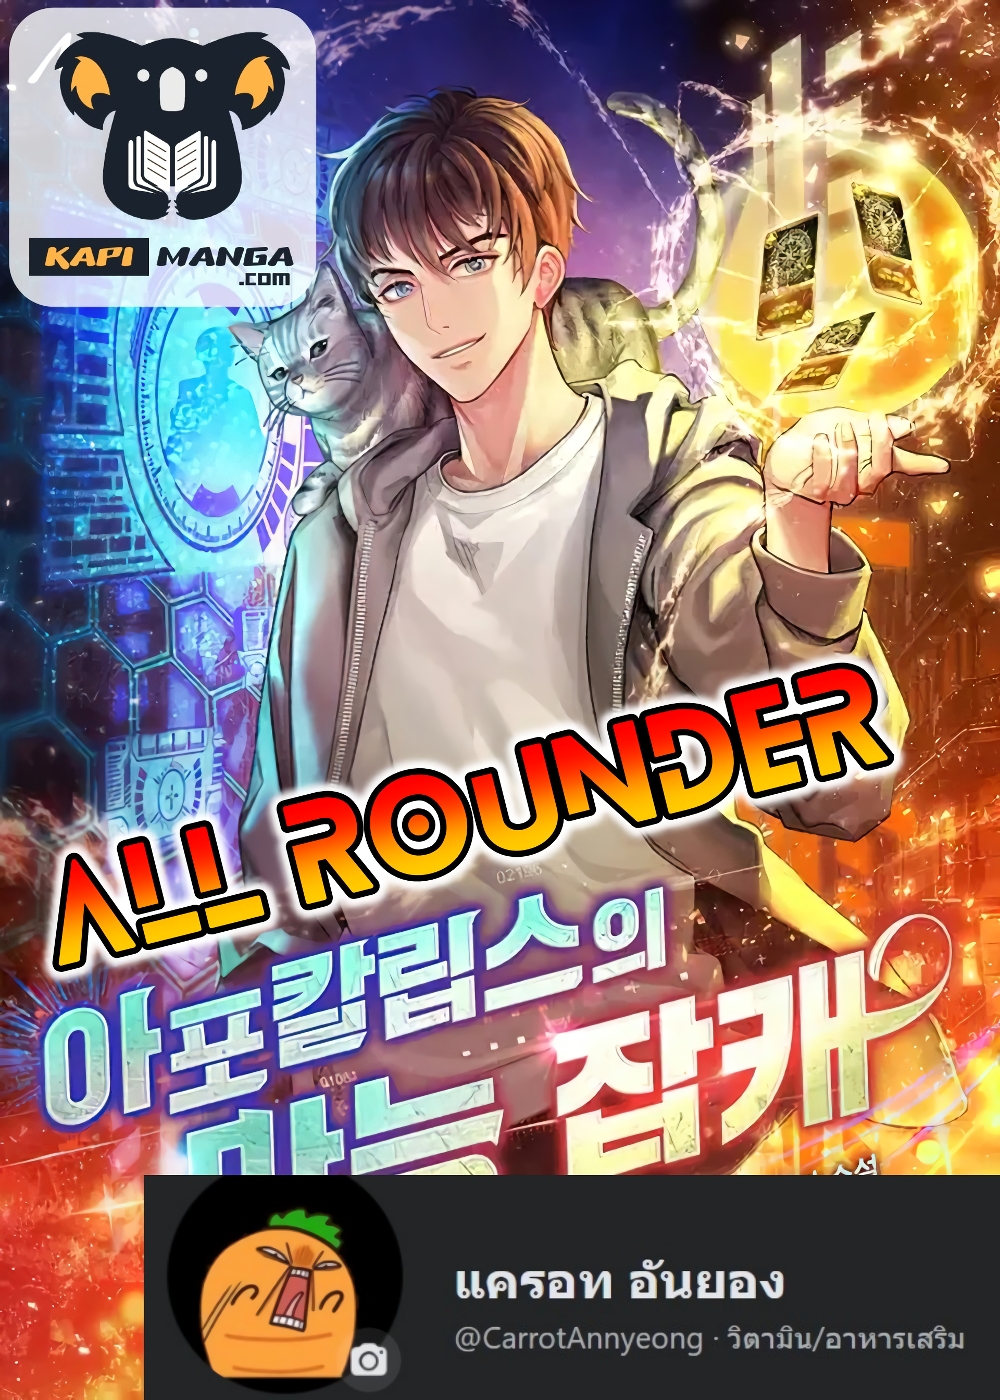 All Rounder13 (1)